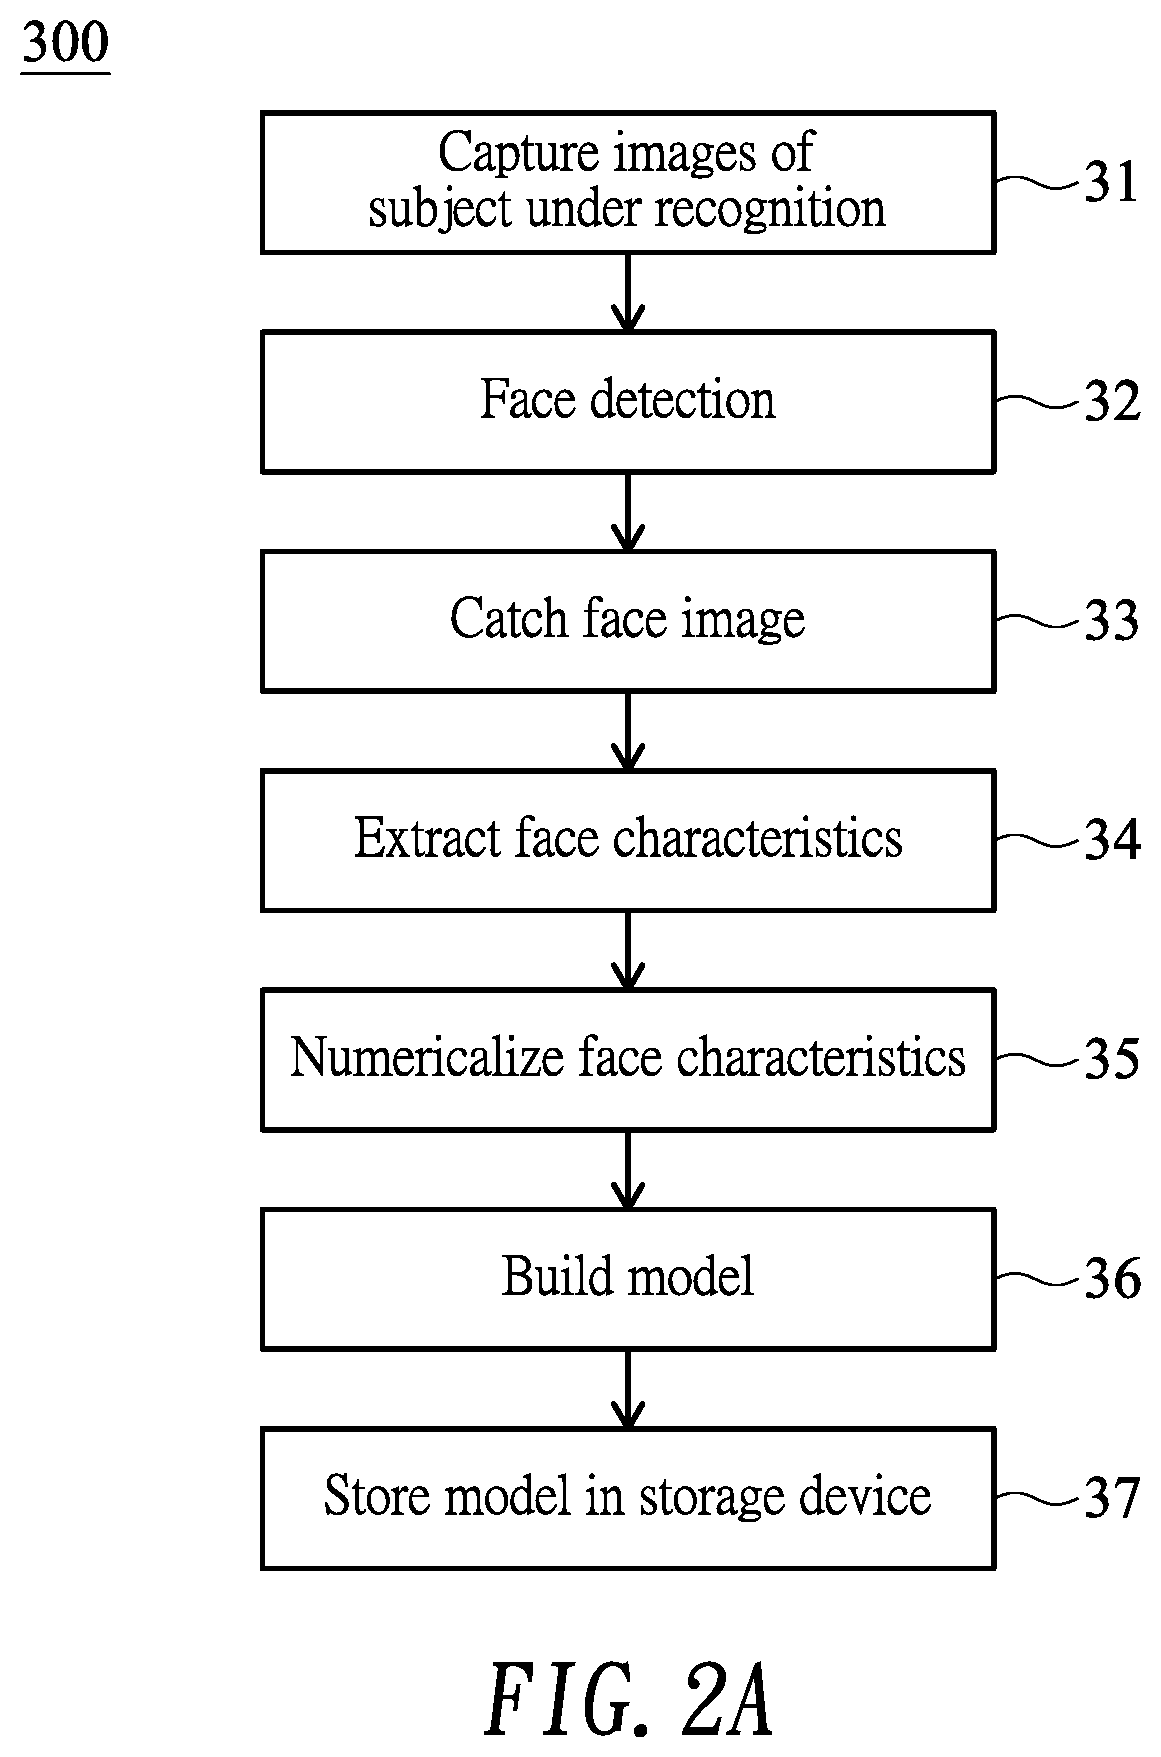 Live facial recognition system and method